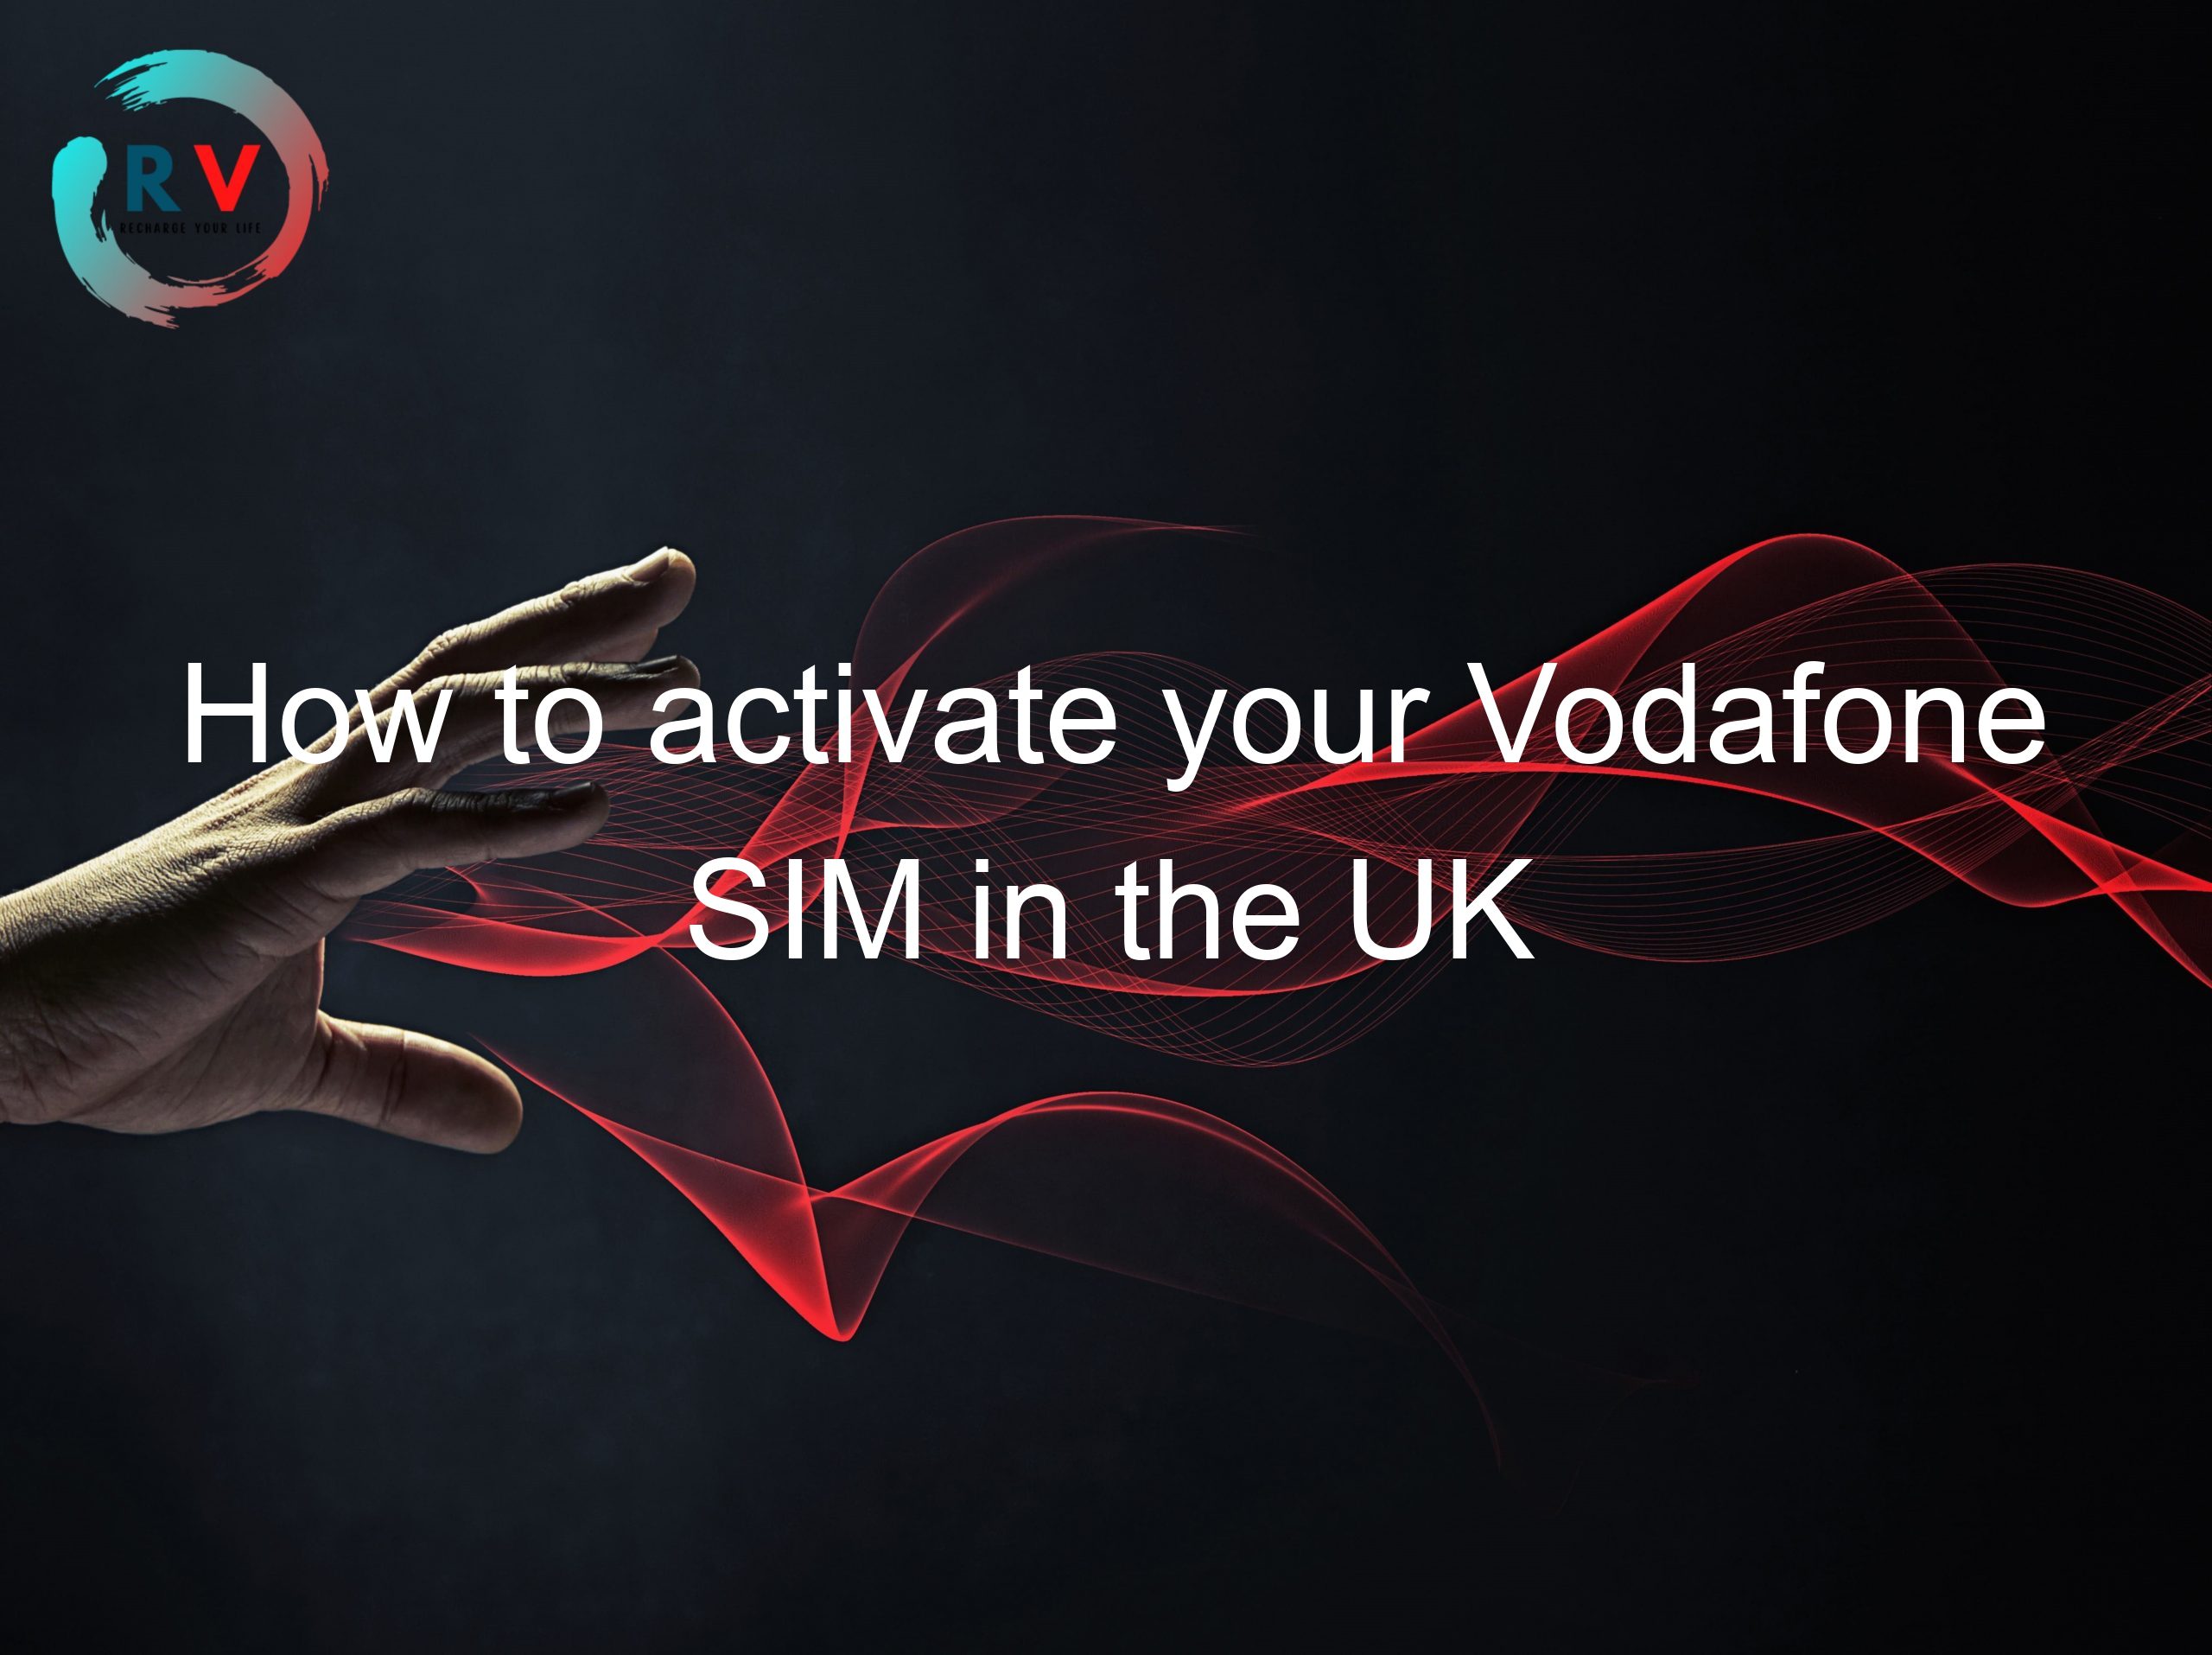 How to activate your Vodafone SIM in the UK